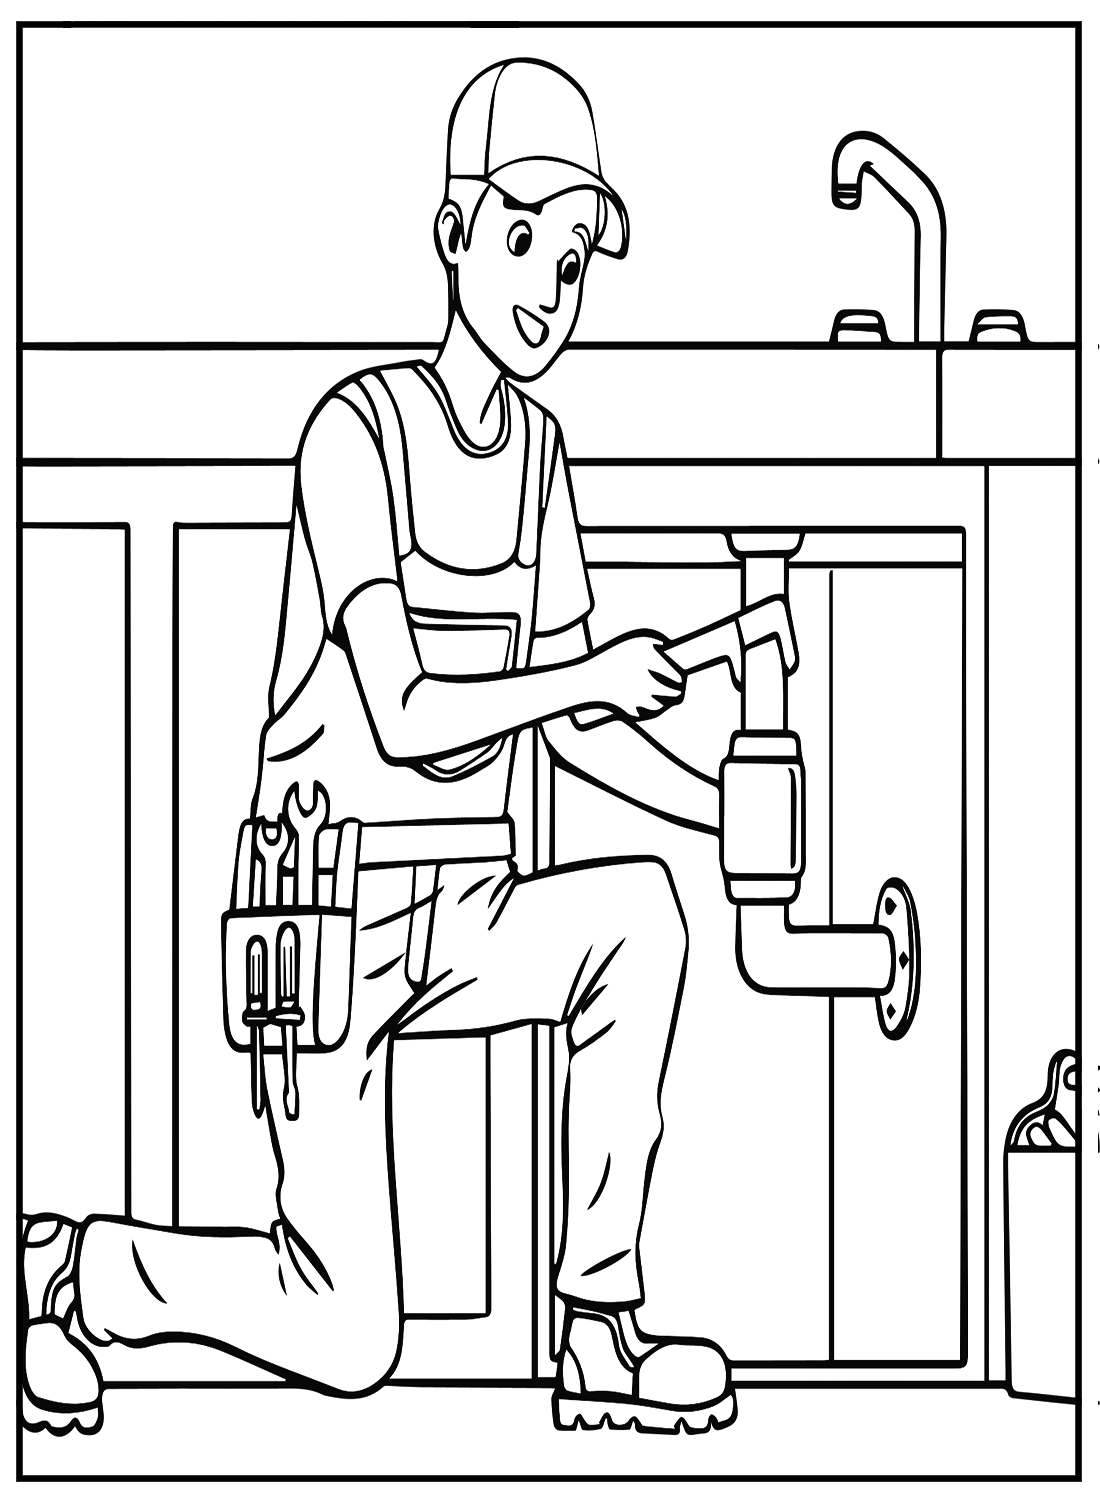 Plumber With Wrench Coloring Pages